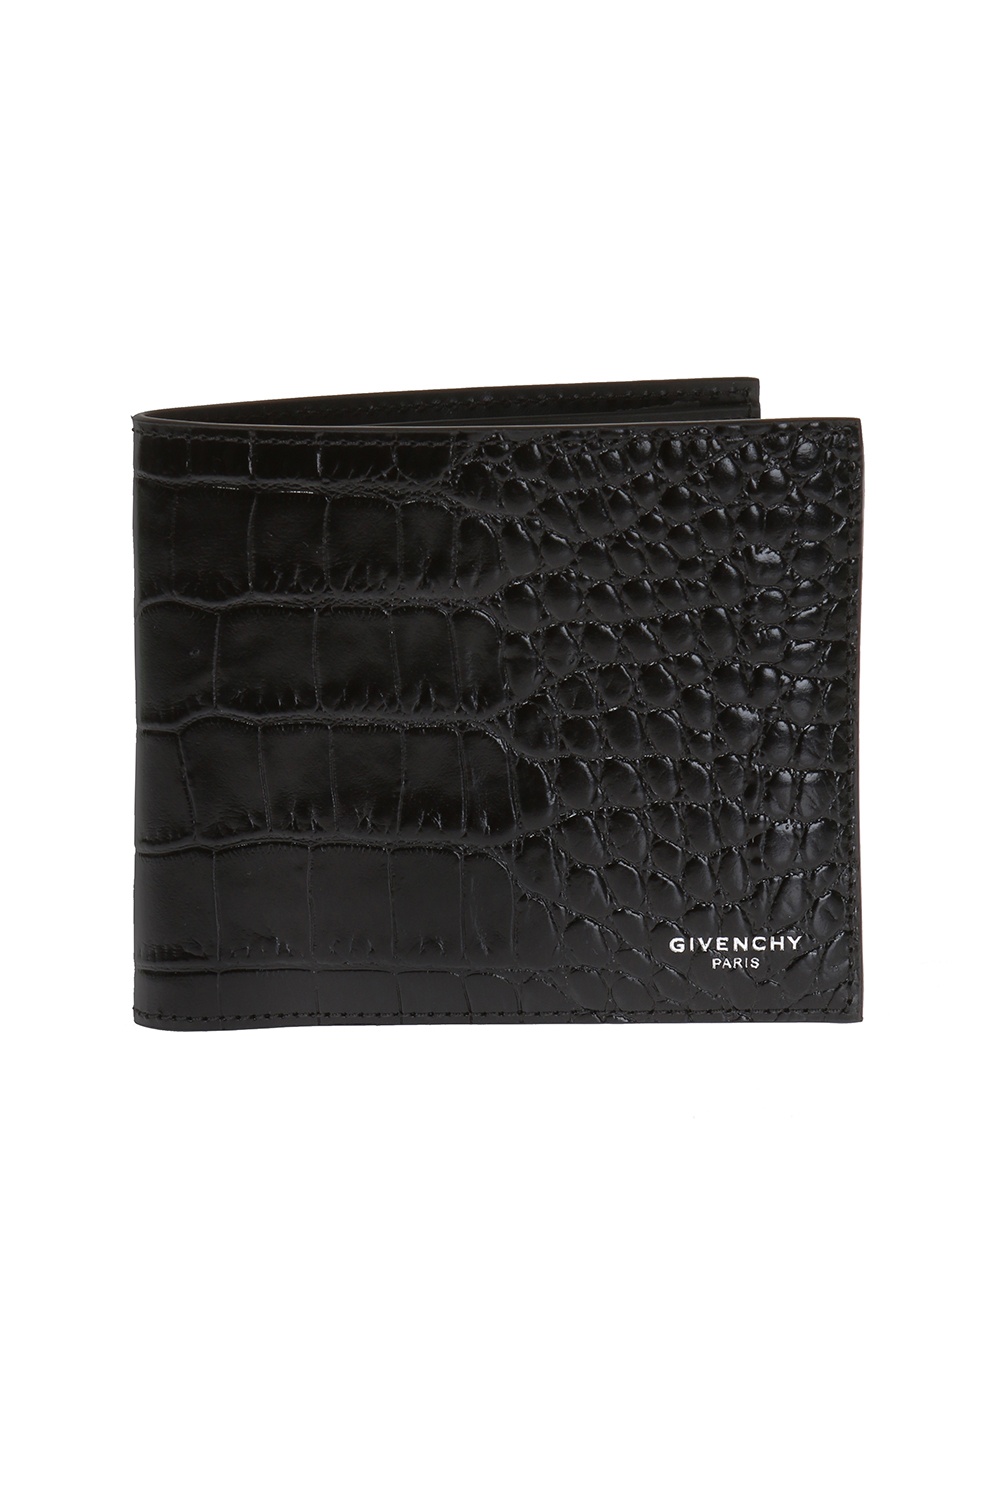 Black Leather wallet Givenchy - Vitkac Canada